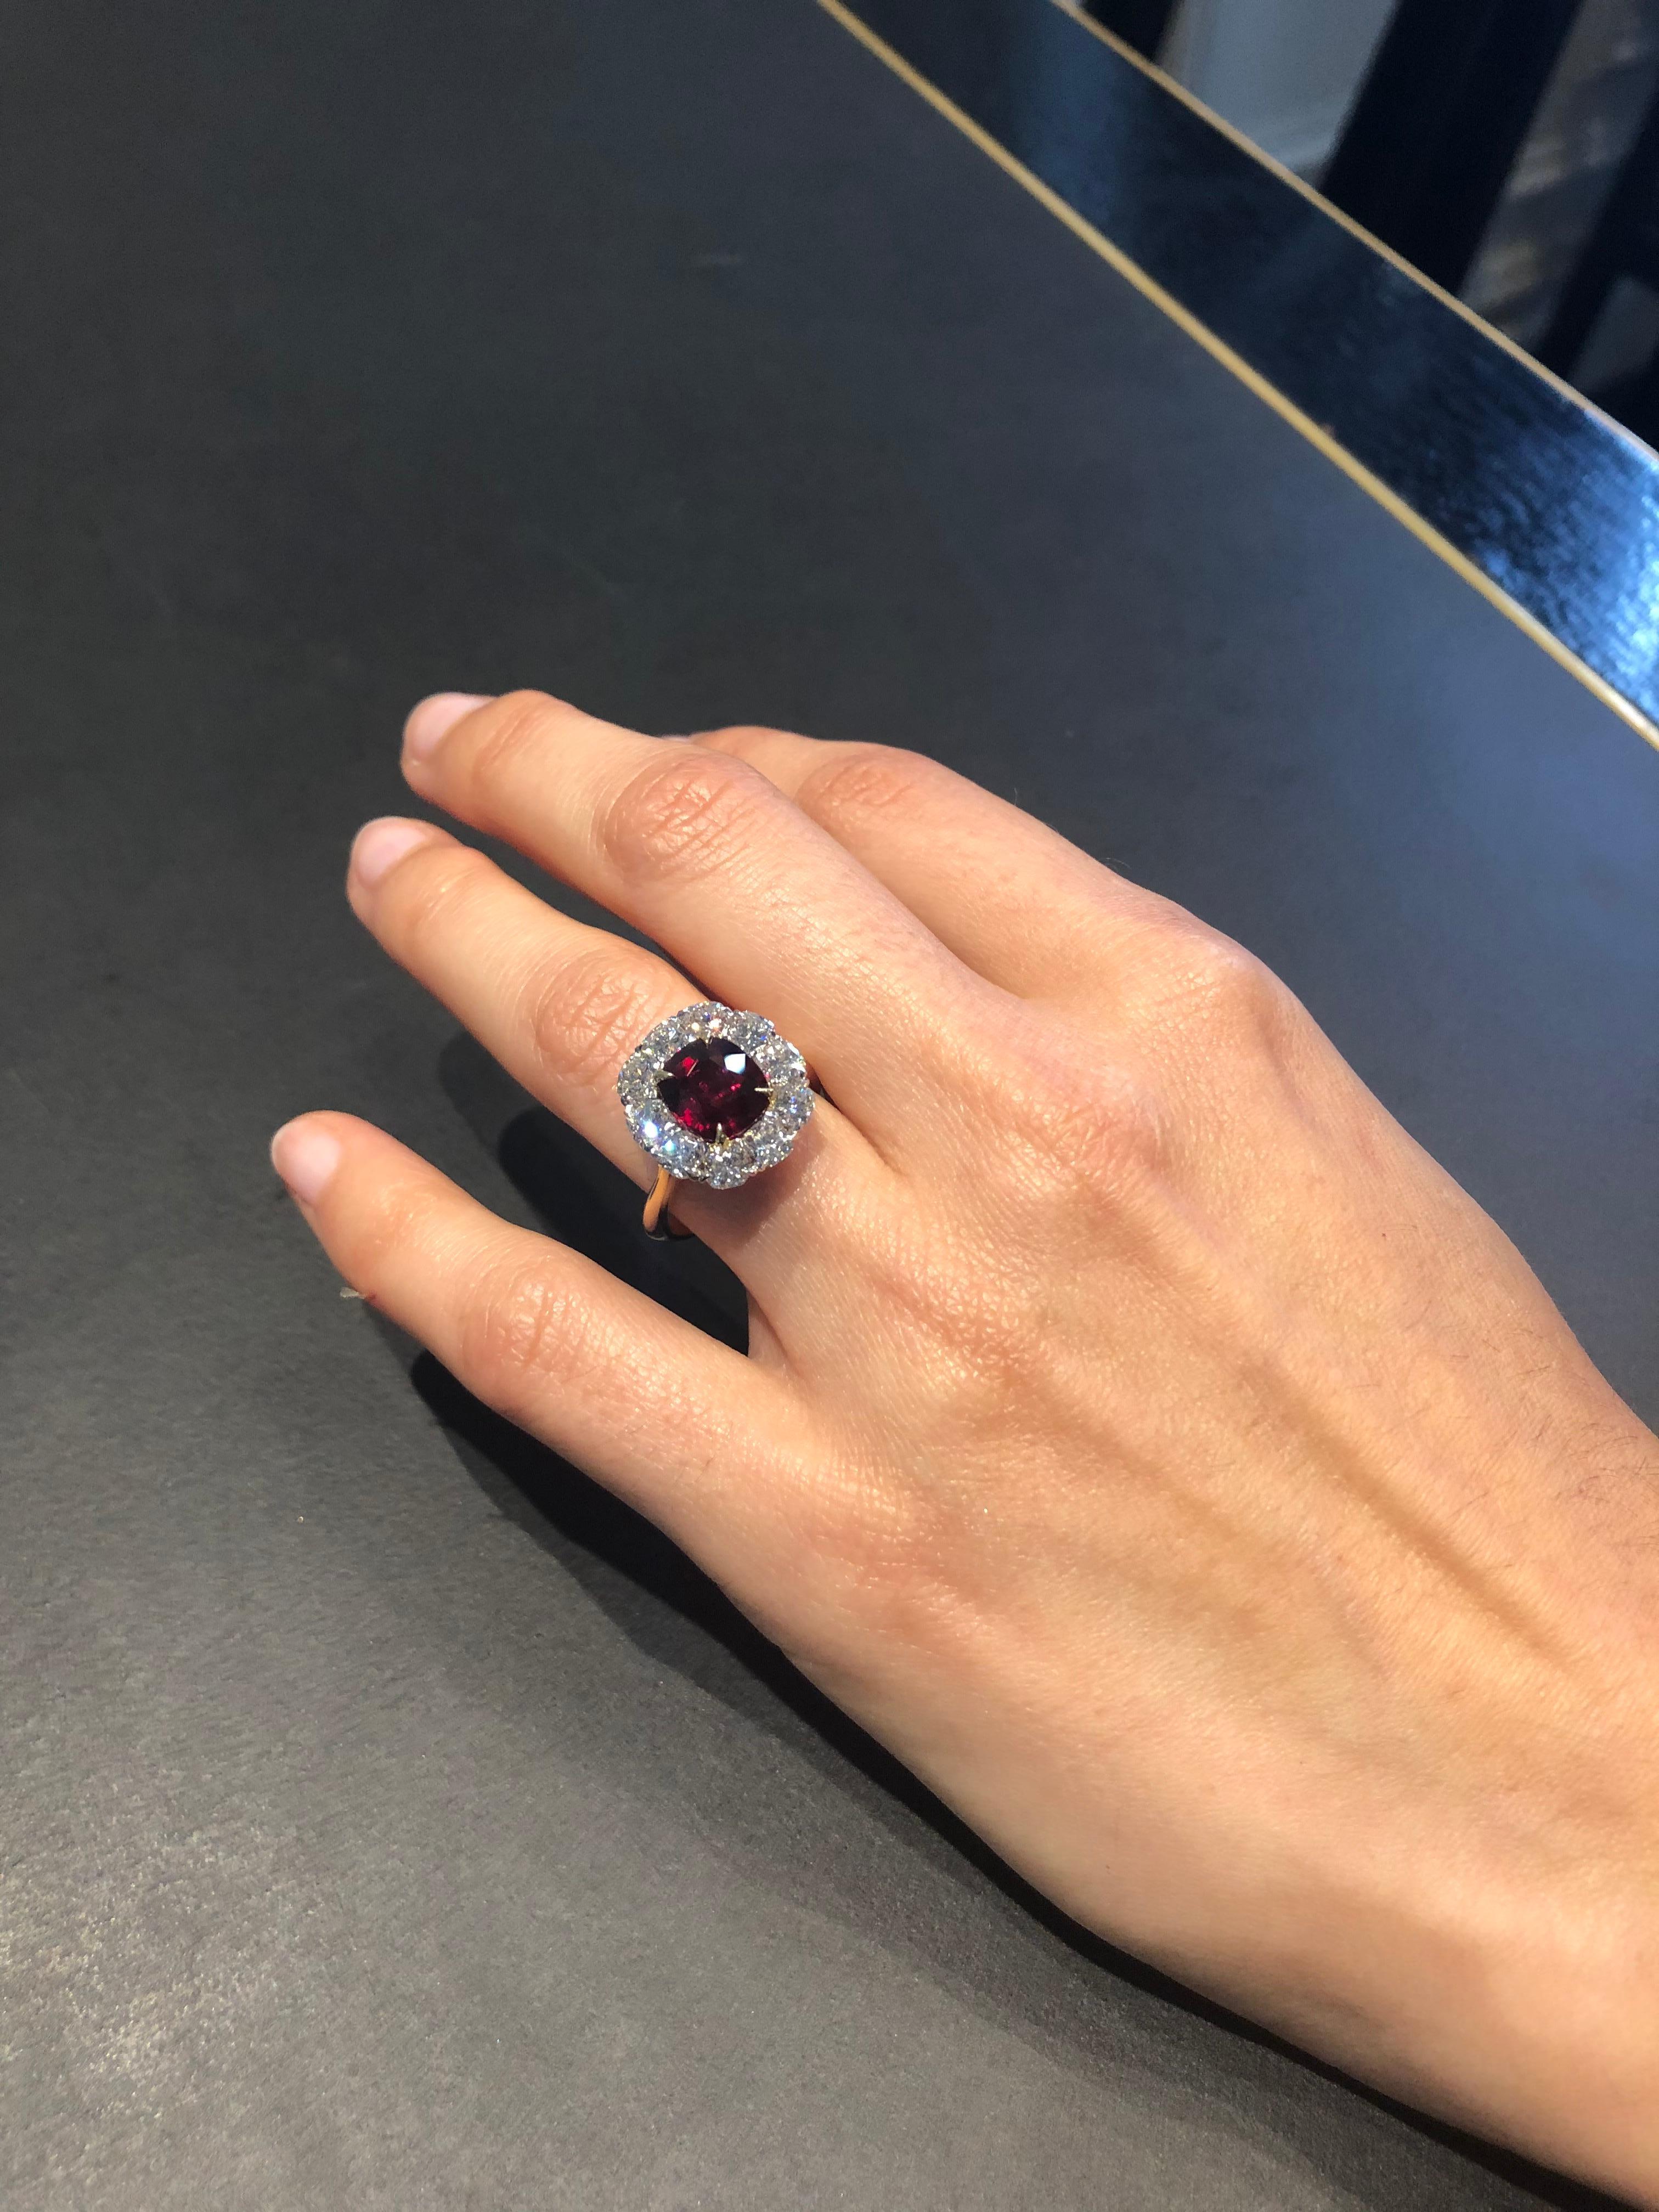 Stunning Hand made, 18 Carat Yellow and White gold Dress Ring, Set with a Certified, Natural, Un-heated 'Deep Red' Mozambique, 3.01 carat Round Ruby as per GSL AA61947/2U, set in Yellow gold claws, surrounded by 10 Cushion cut white diamonds, 10